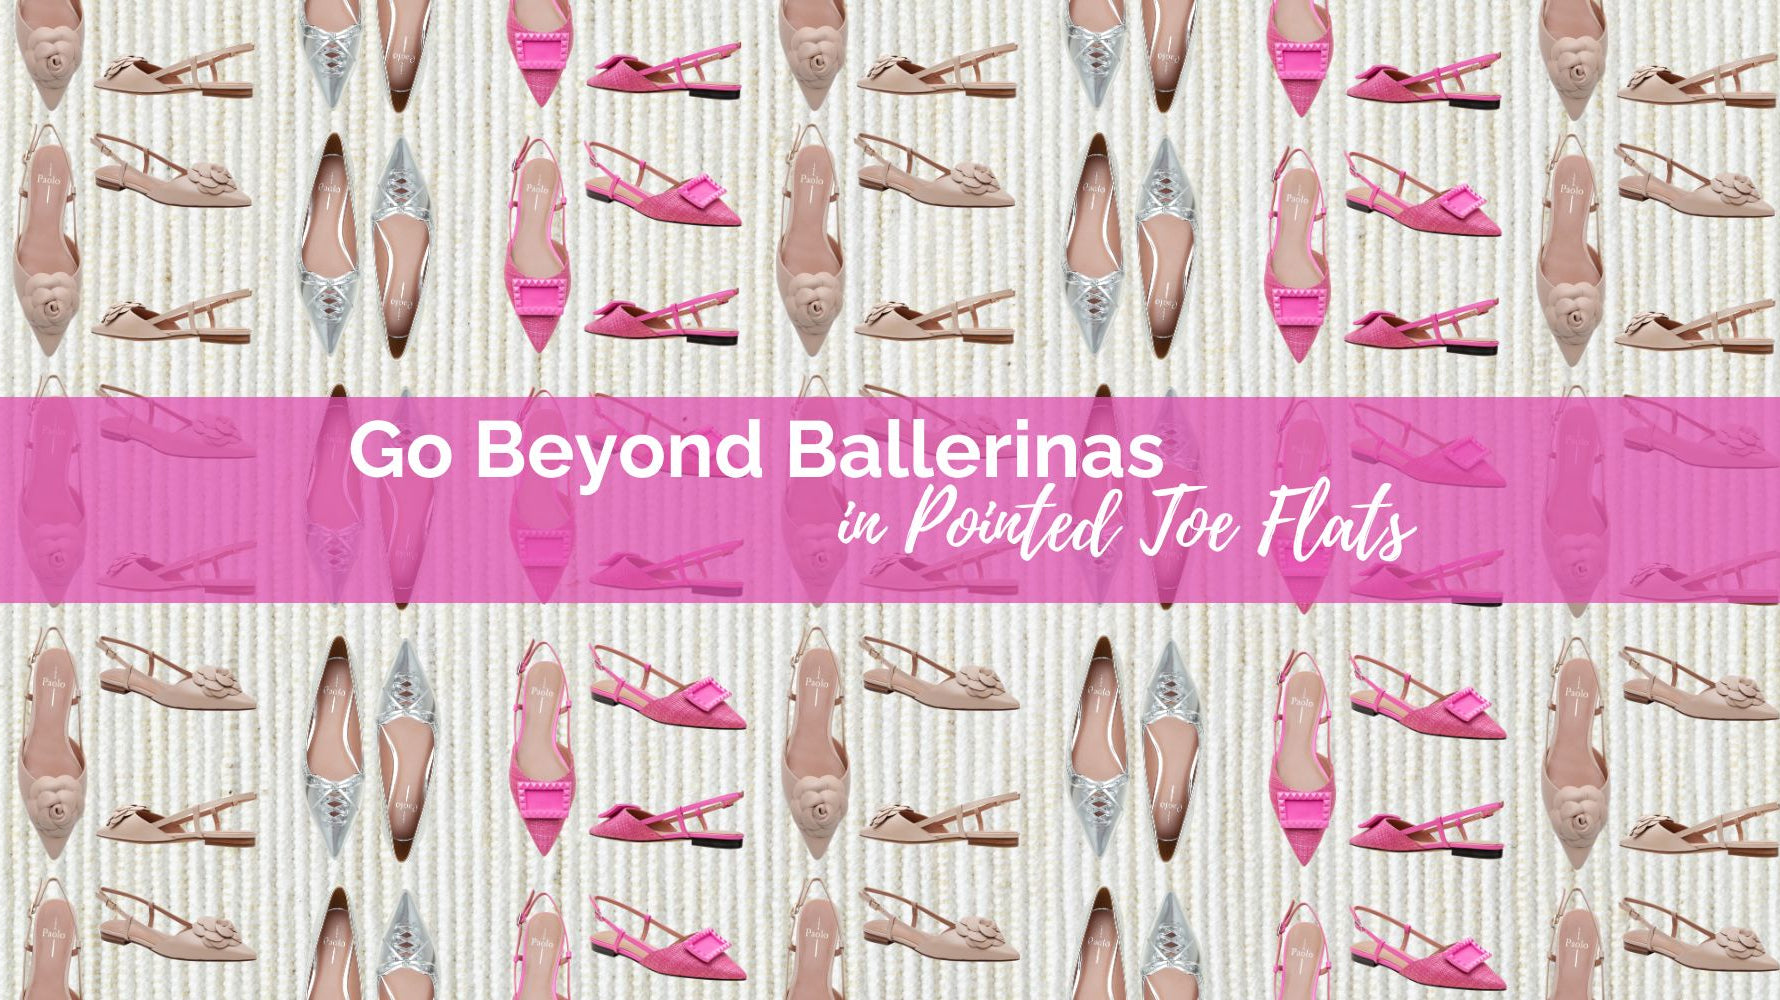 Go Beyond Ballerinas in Pointed Toe Flats